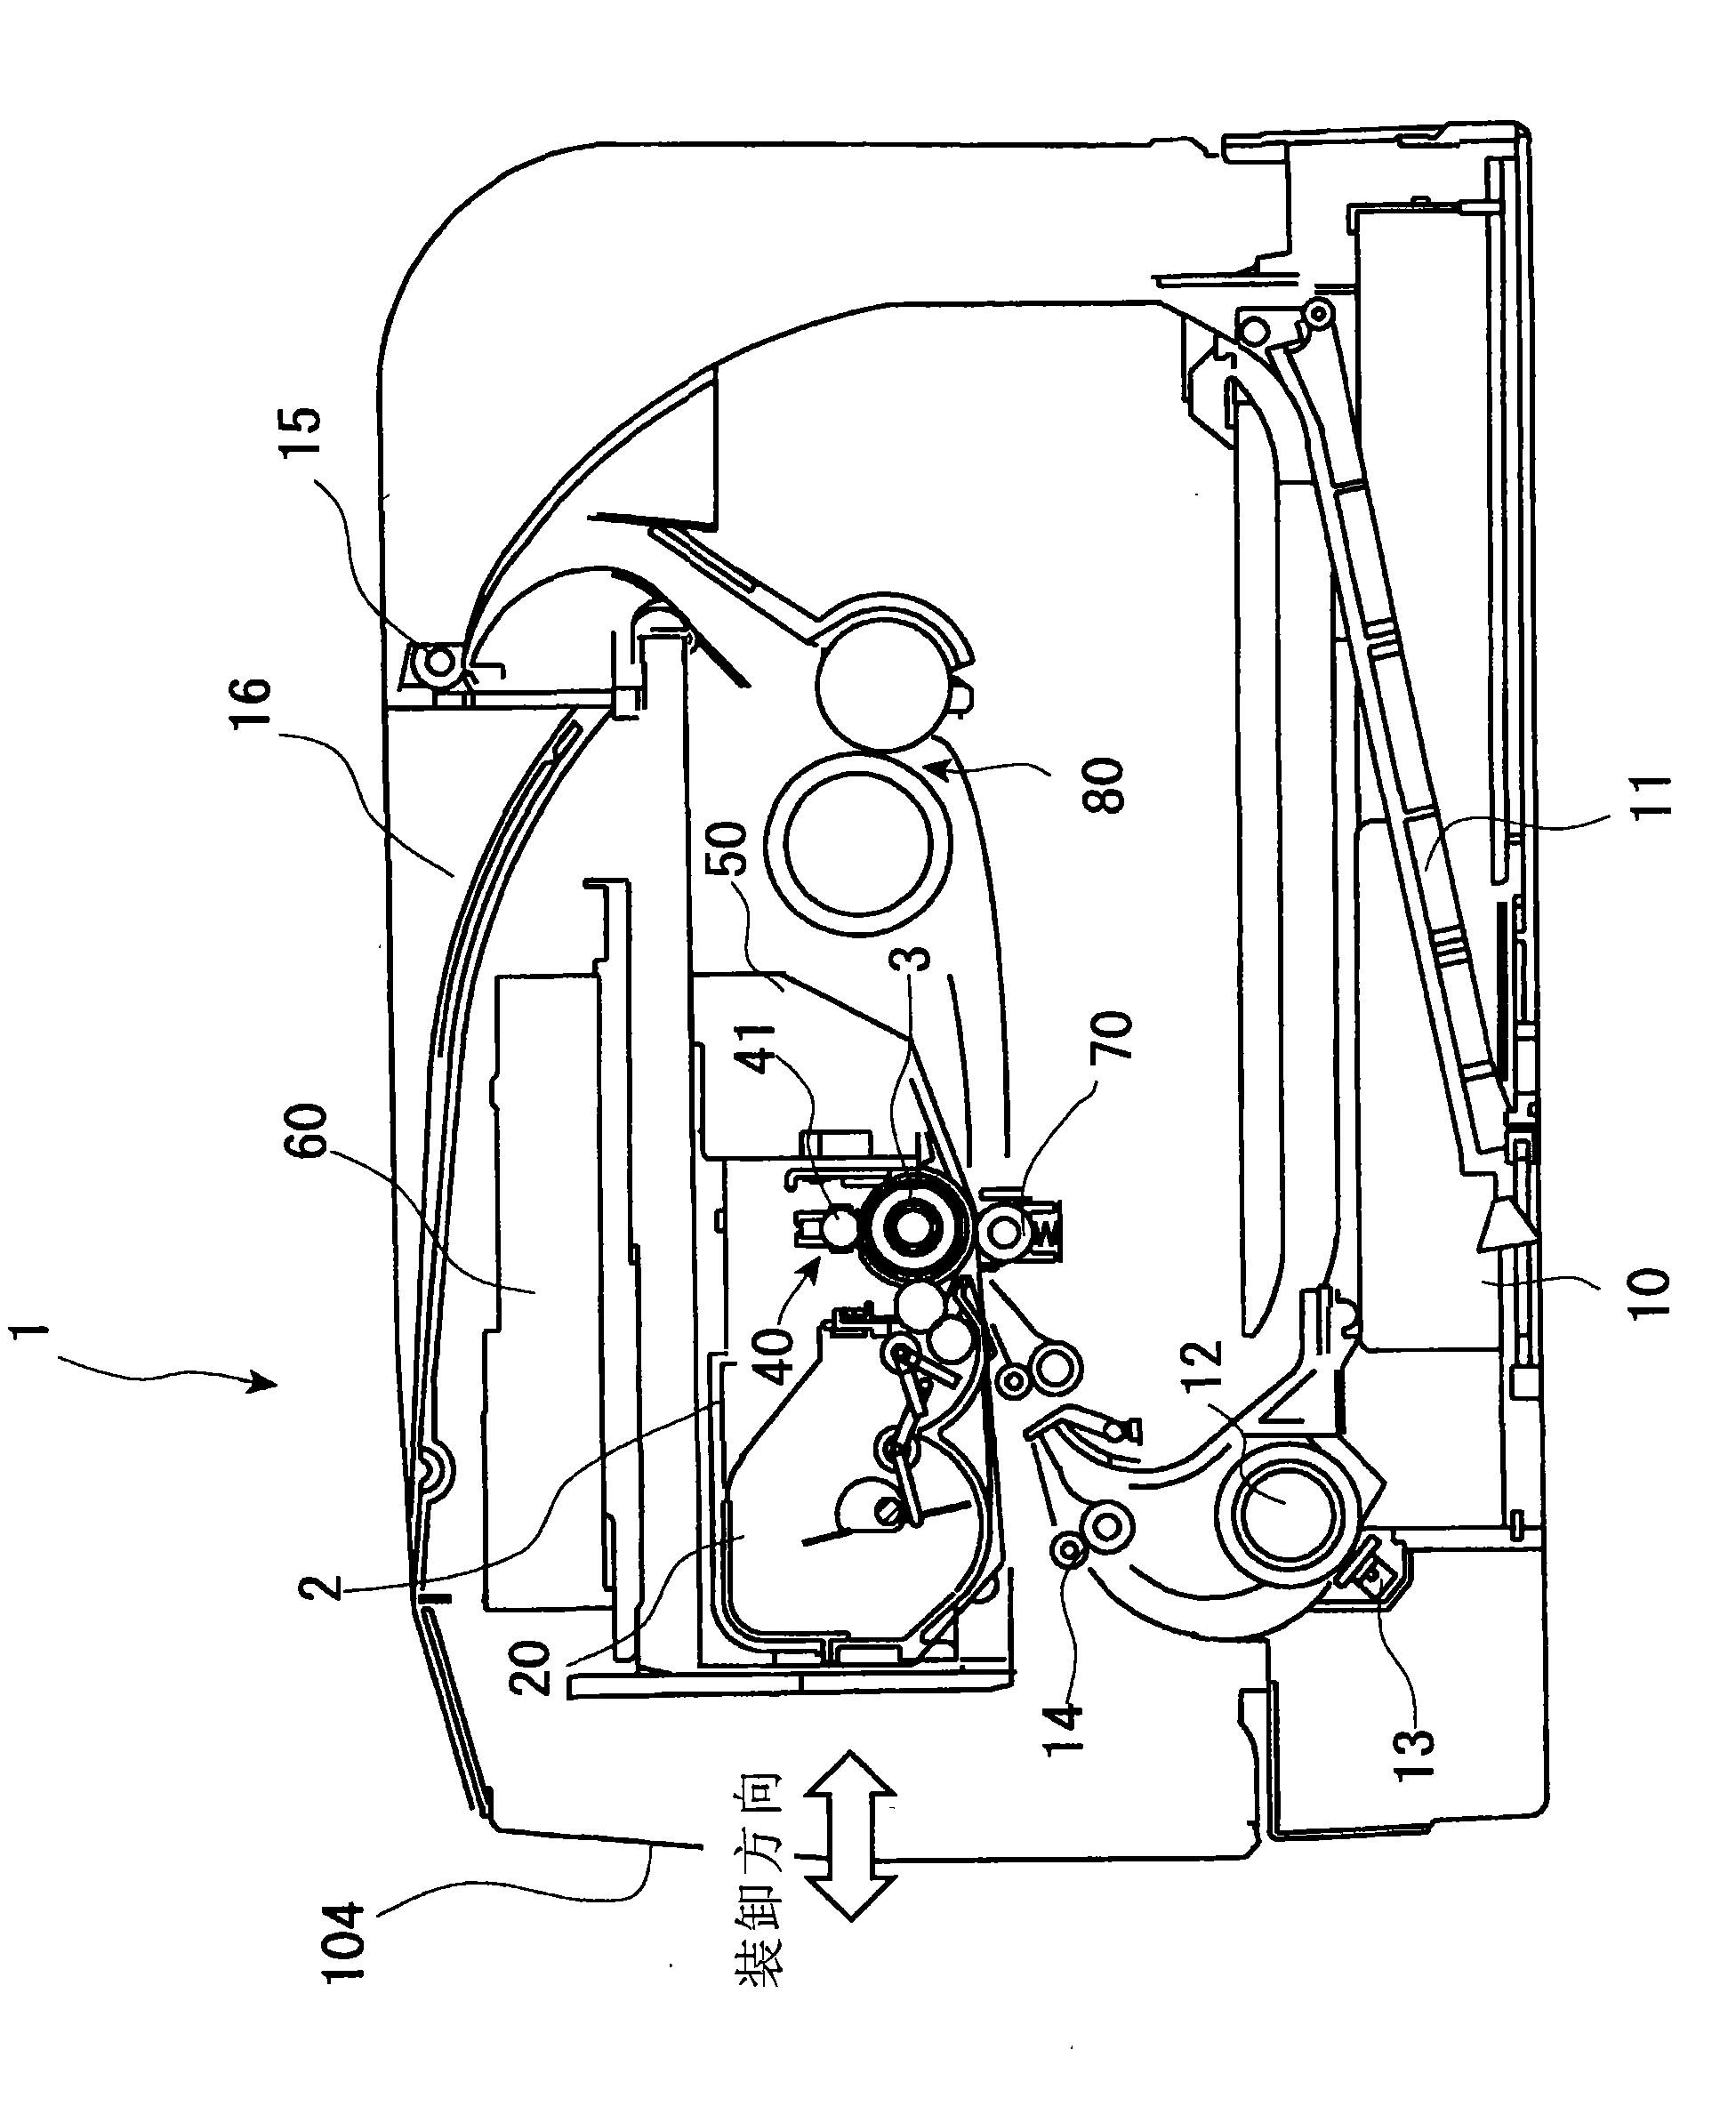 Power supply circuit, image forming device, power panel and processing unit